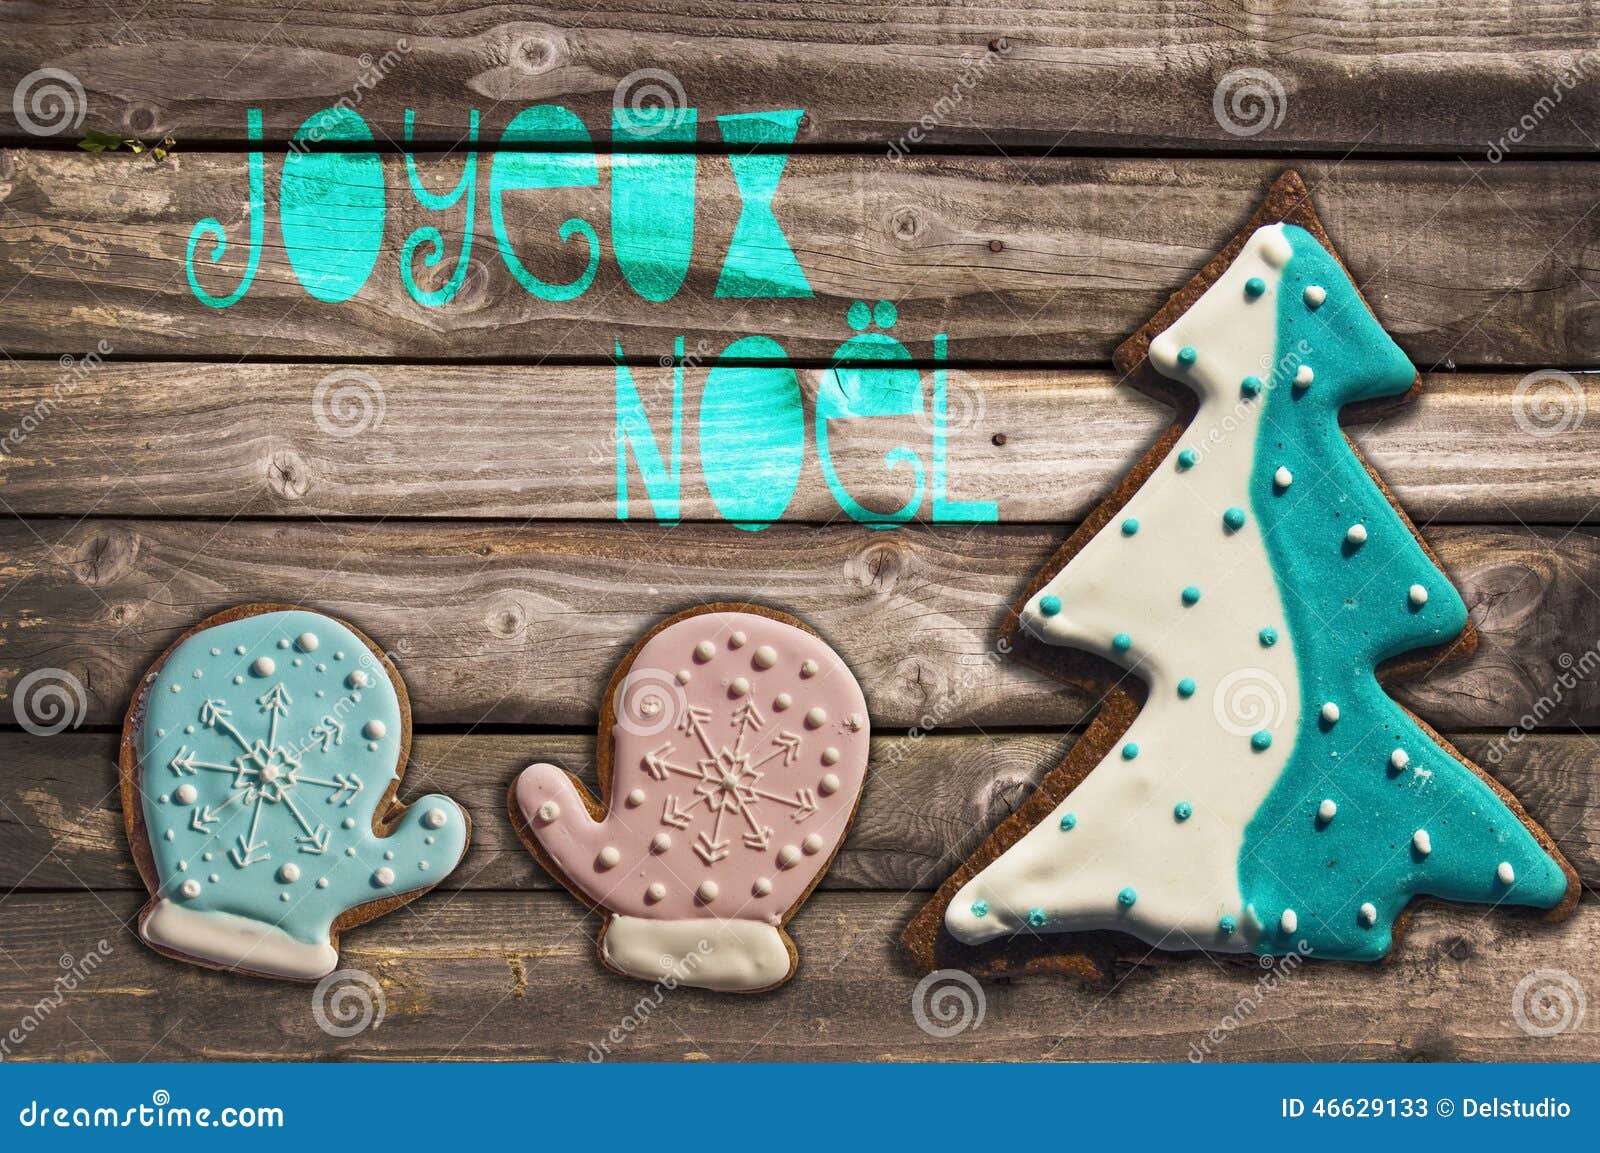 Gingerbread Cookies On Wooden Background And Text Joyeux Noel Stock Image - Image of wooden ...